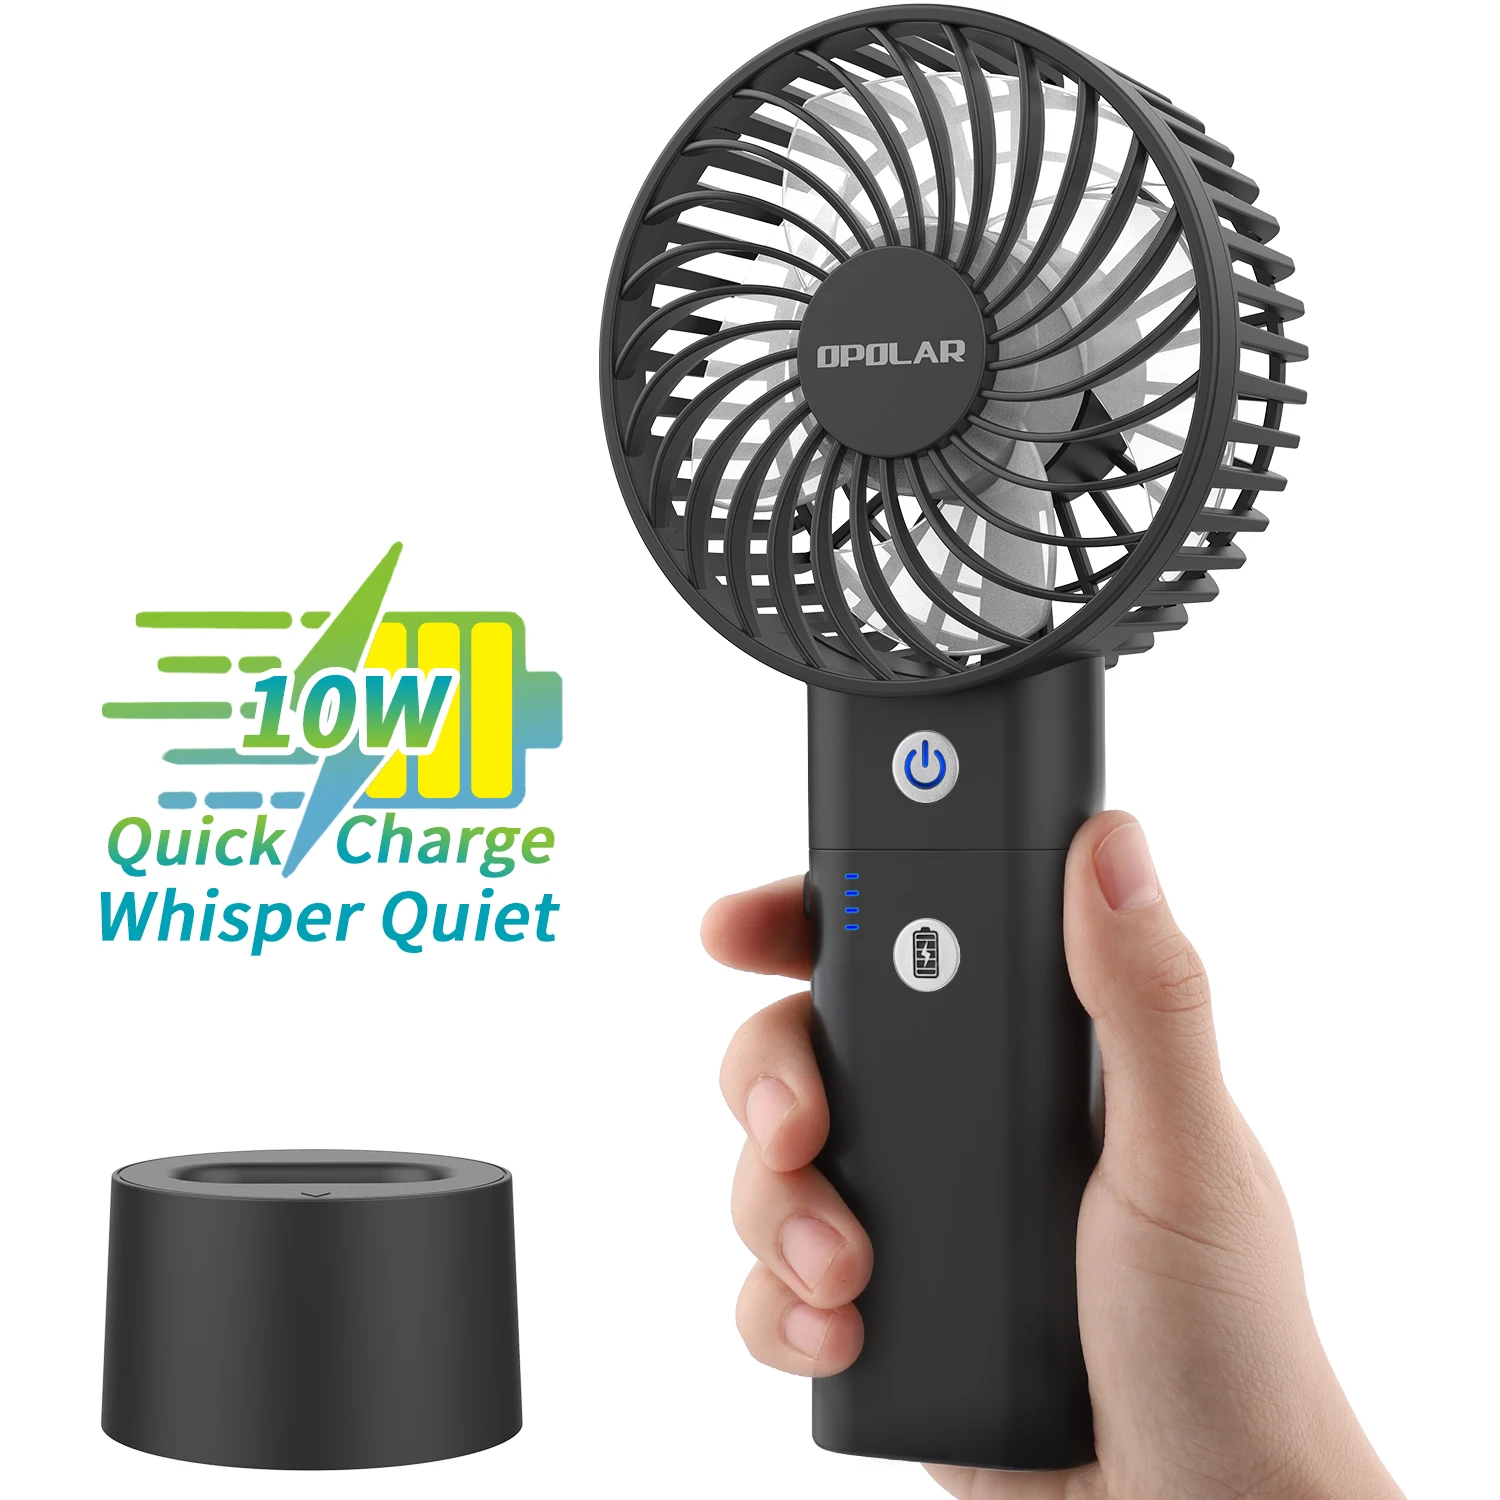 10W Quick Charge Small Portable Fan with 5000mAh Power Bank Strong Airflow,3 Speed Quiet Fan for Travel Sightseeing 5-18H Work Time OPOLAR 2019 New Battery Operated Handheld Personal Fan with Base